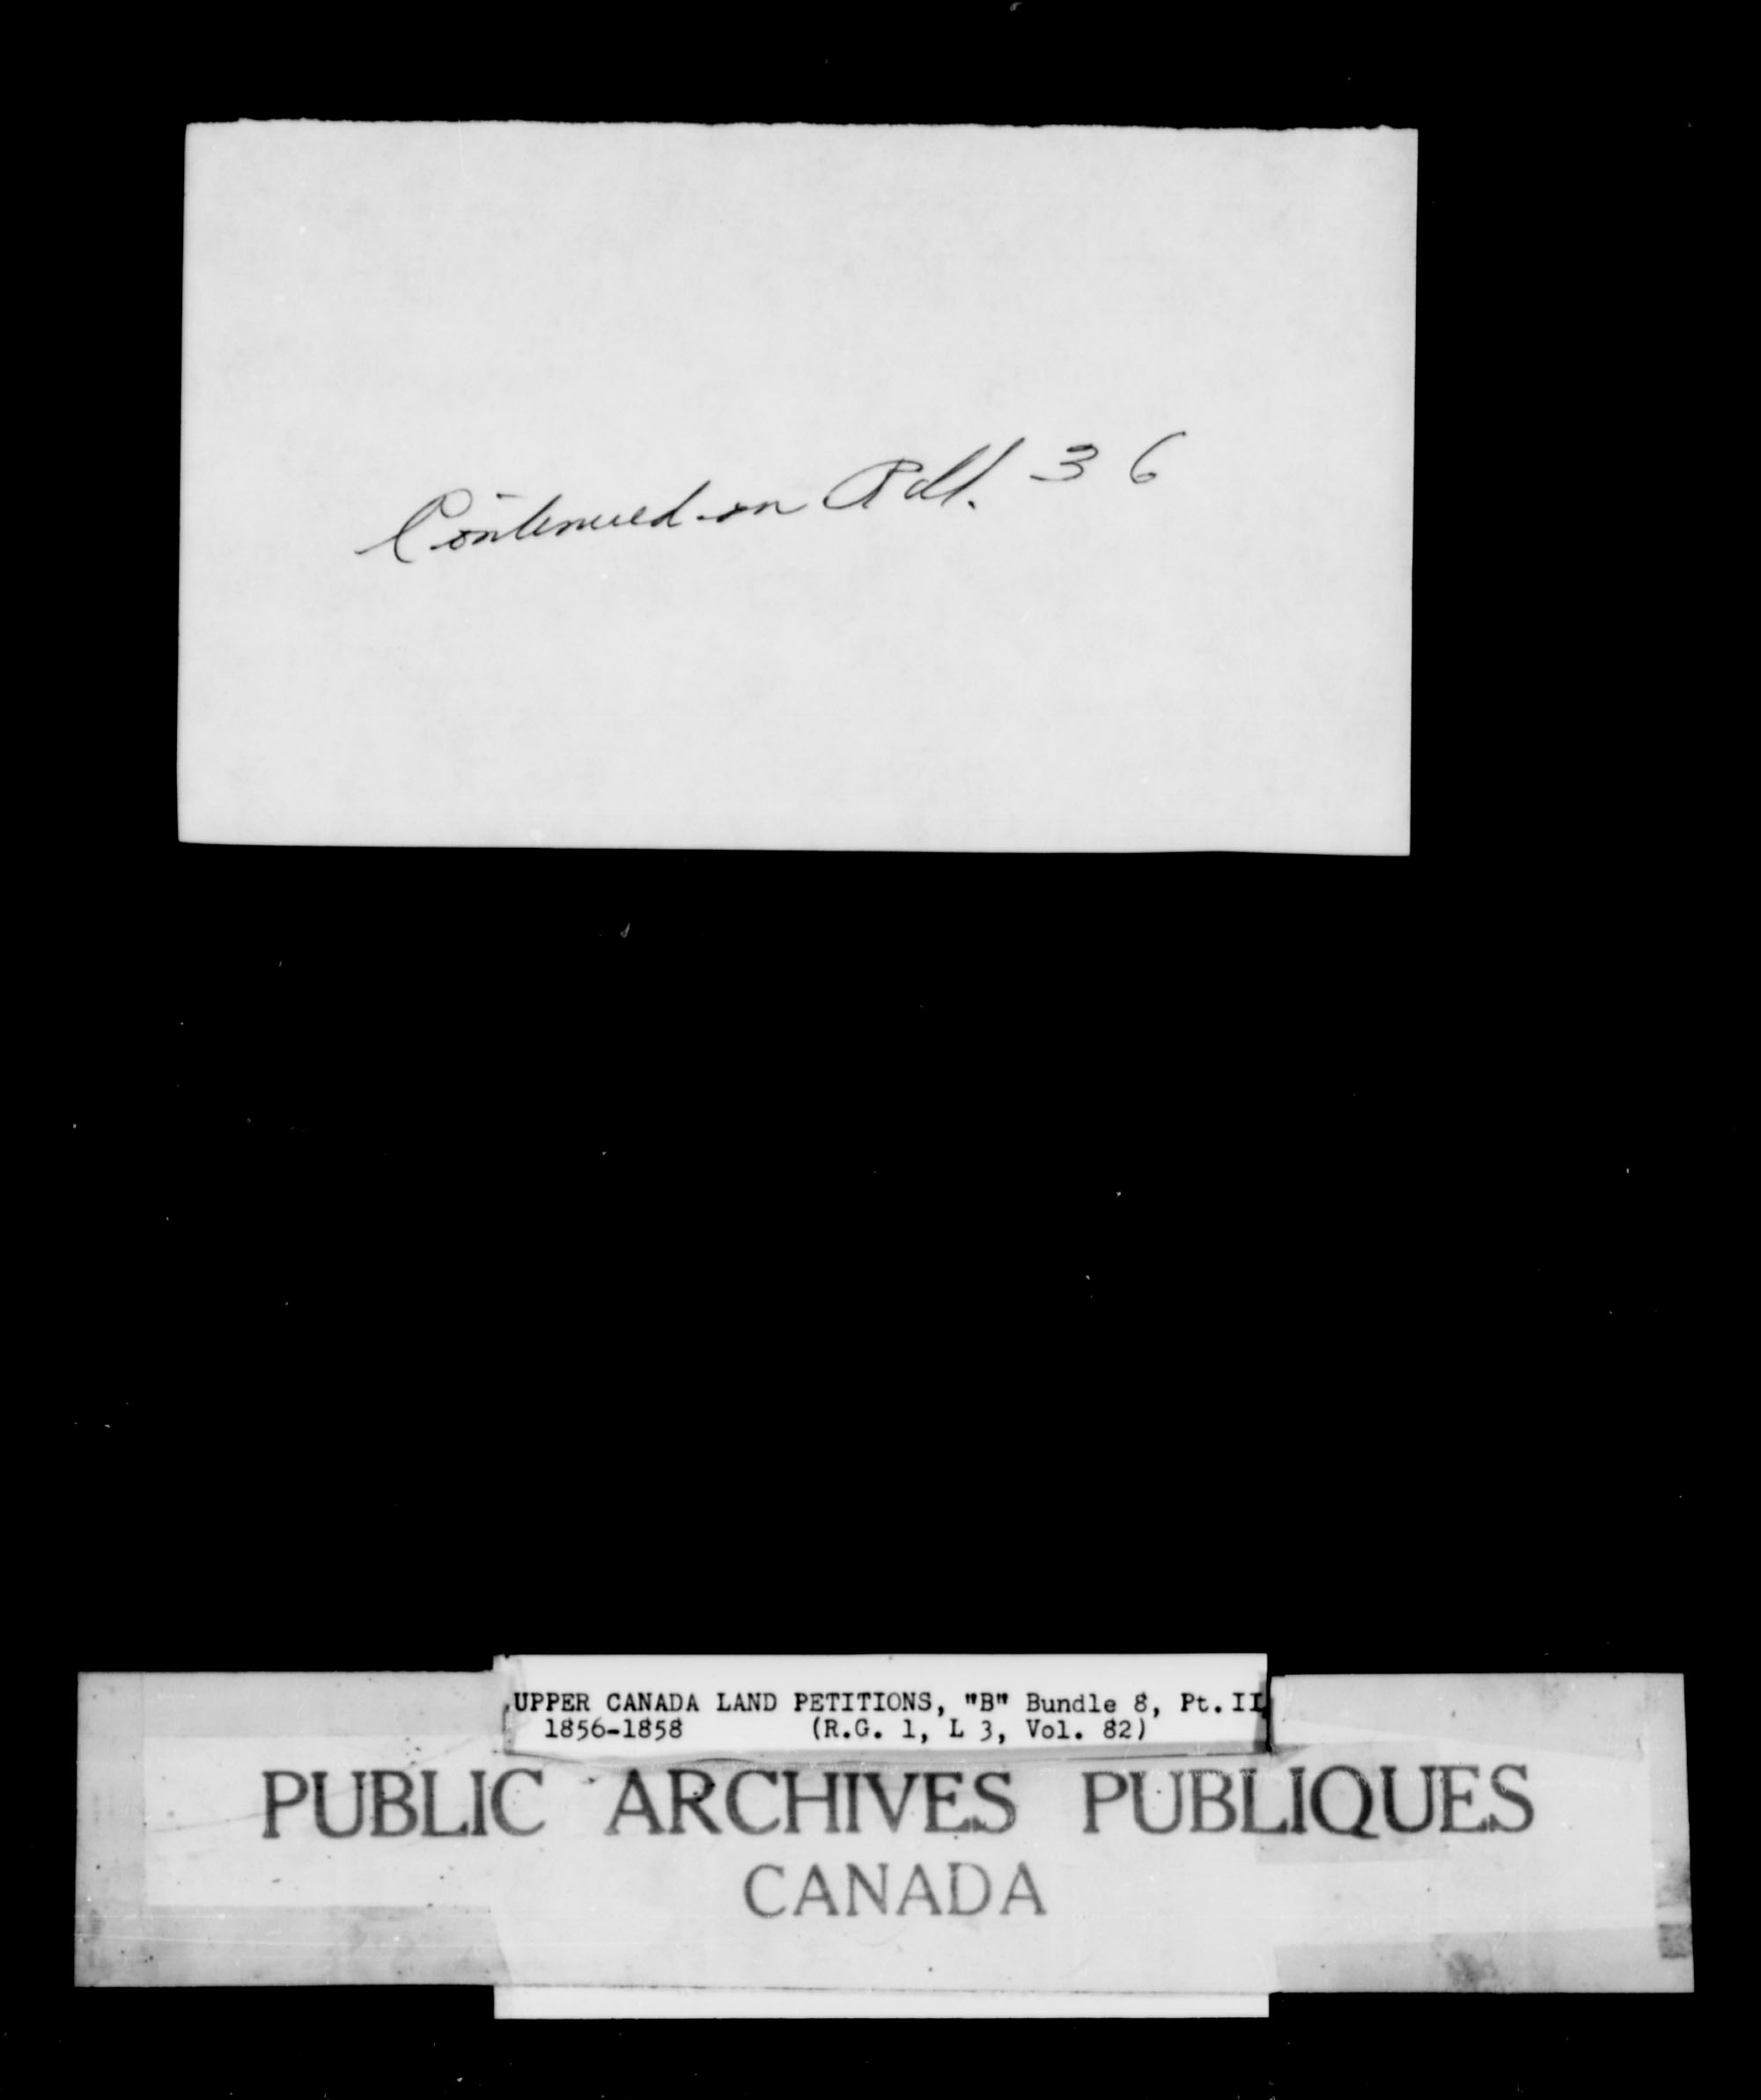 Title: Upper Canada Land Petitions (1763-1865) - Mikan Number: 205131 - Microform: c-1643